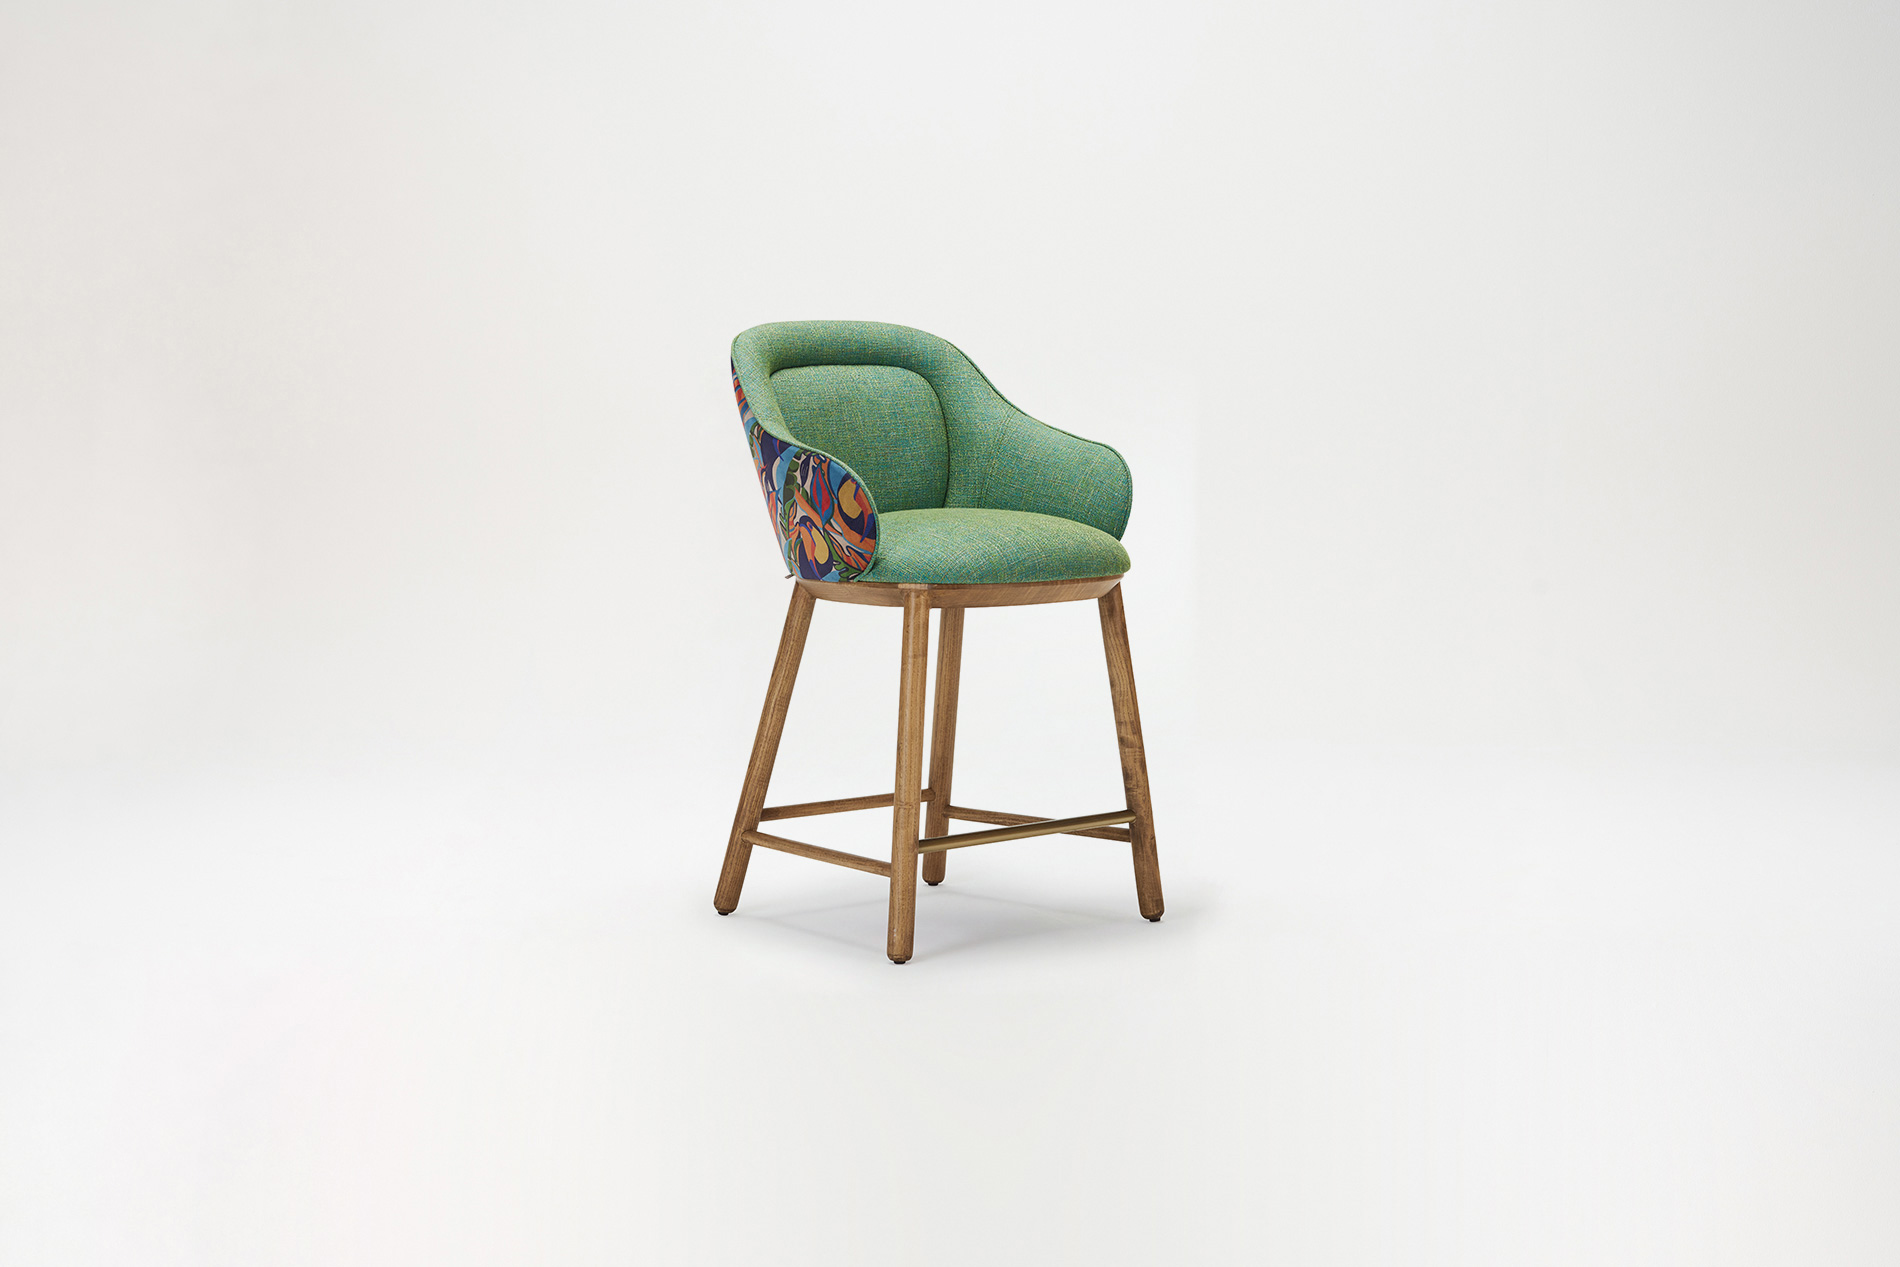 Ankara's bar stools continue this tale of serene elegance, a waltz spanning from history to the promising future.ANKARA ARMCHAIR BAR STOOL